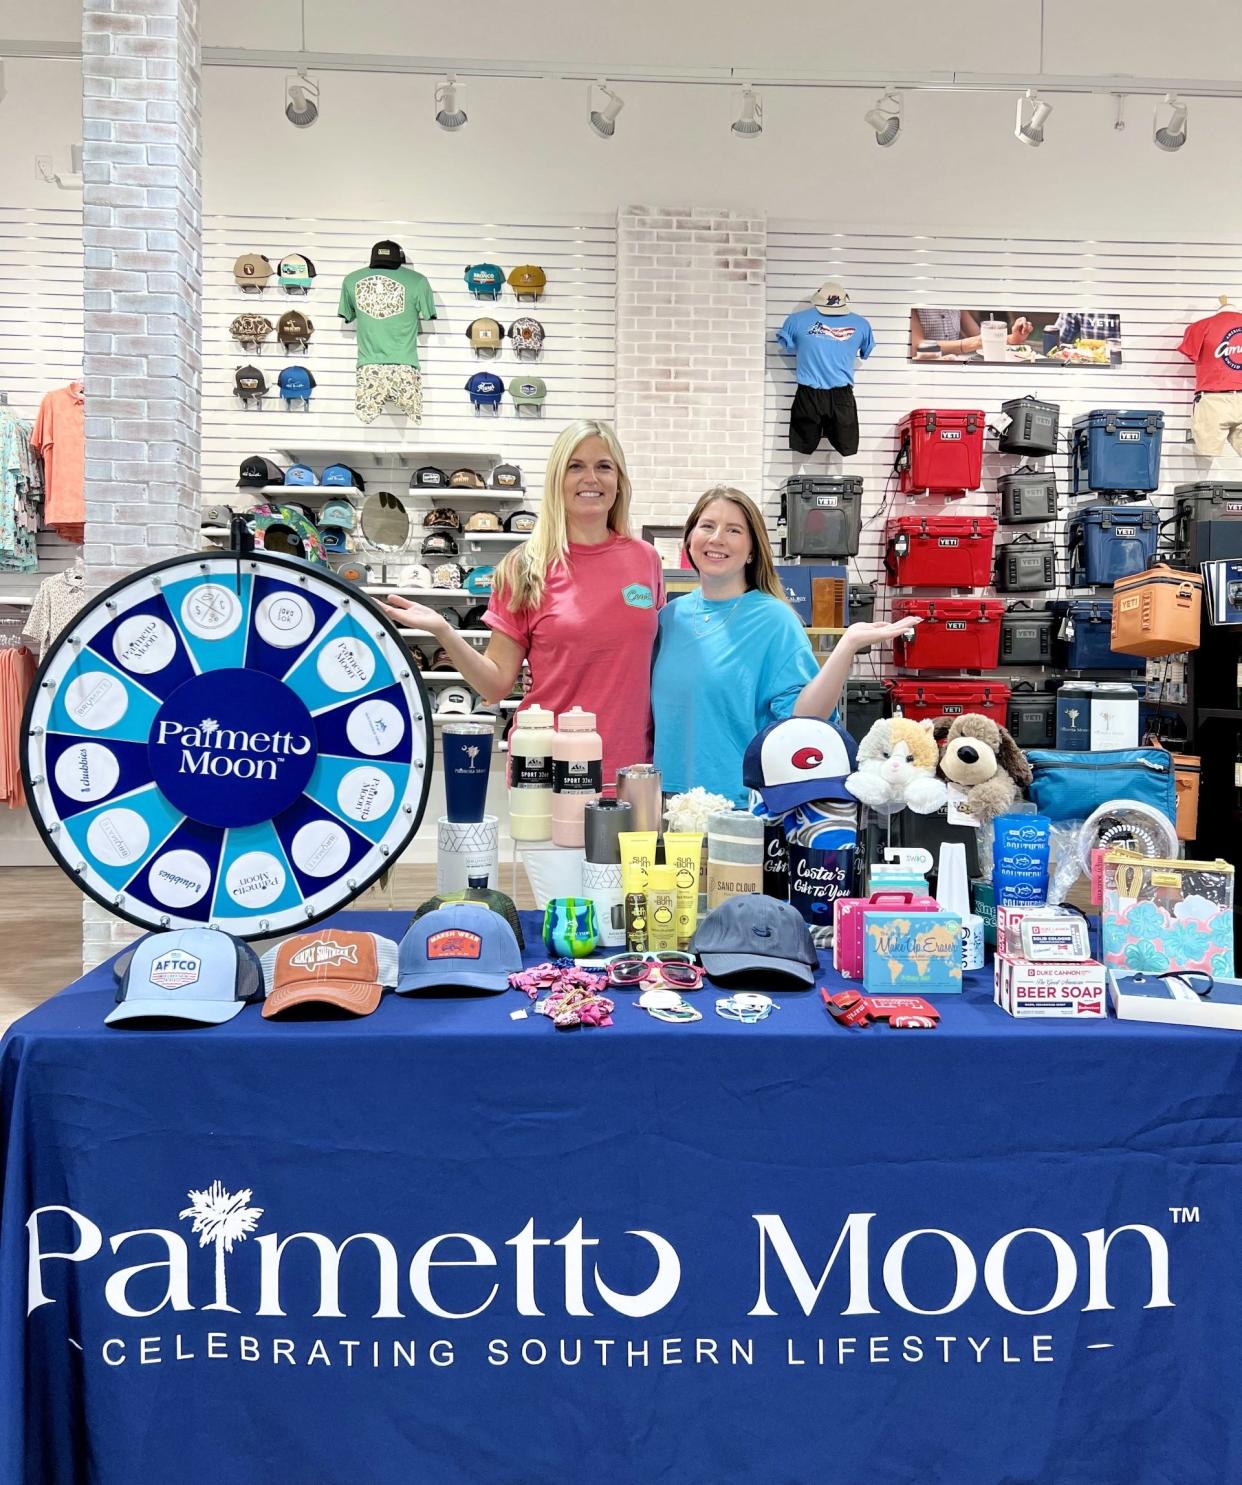 Palmetto Moon held a grand opening celebration at The Outlet Shoopes of the Bluegrass in March 2024.